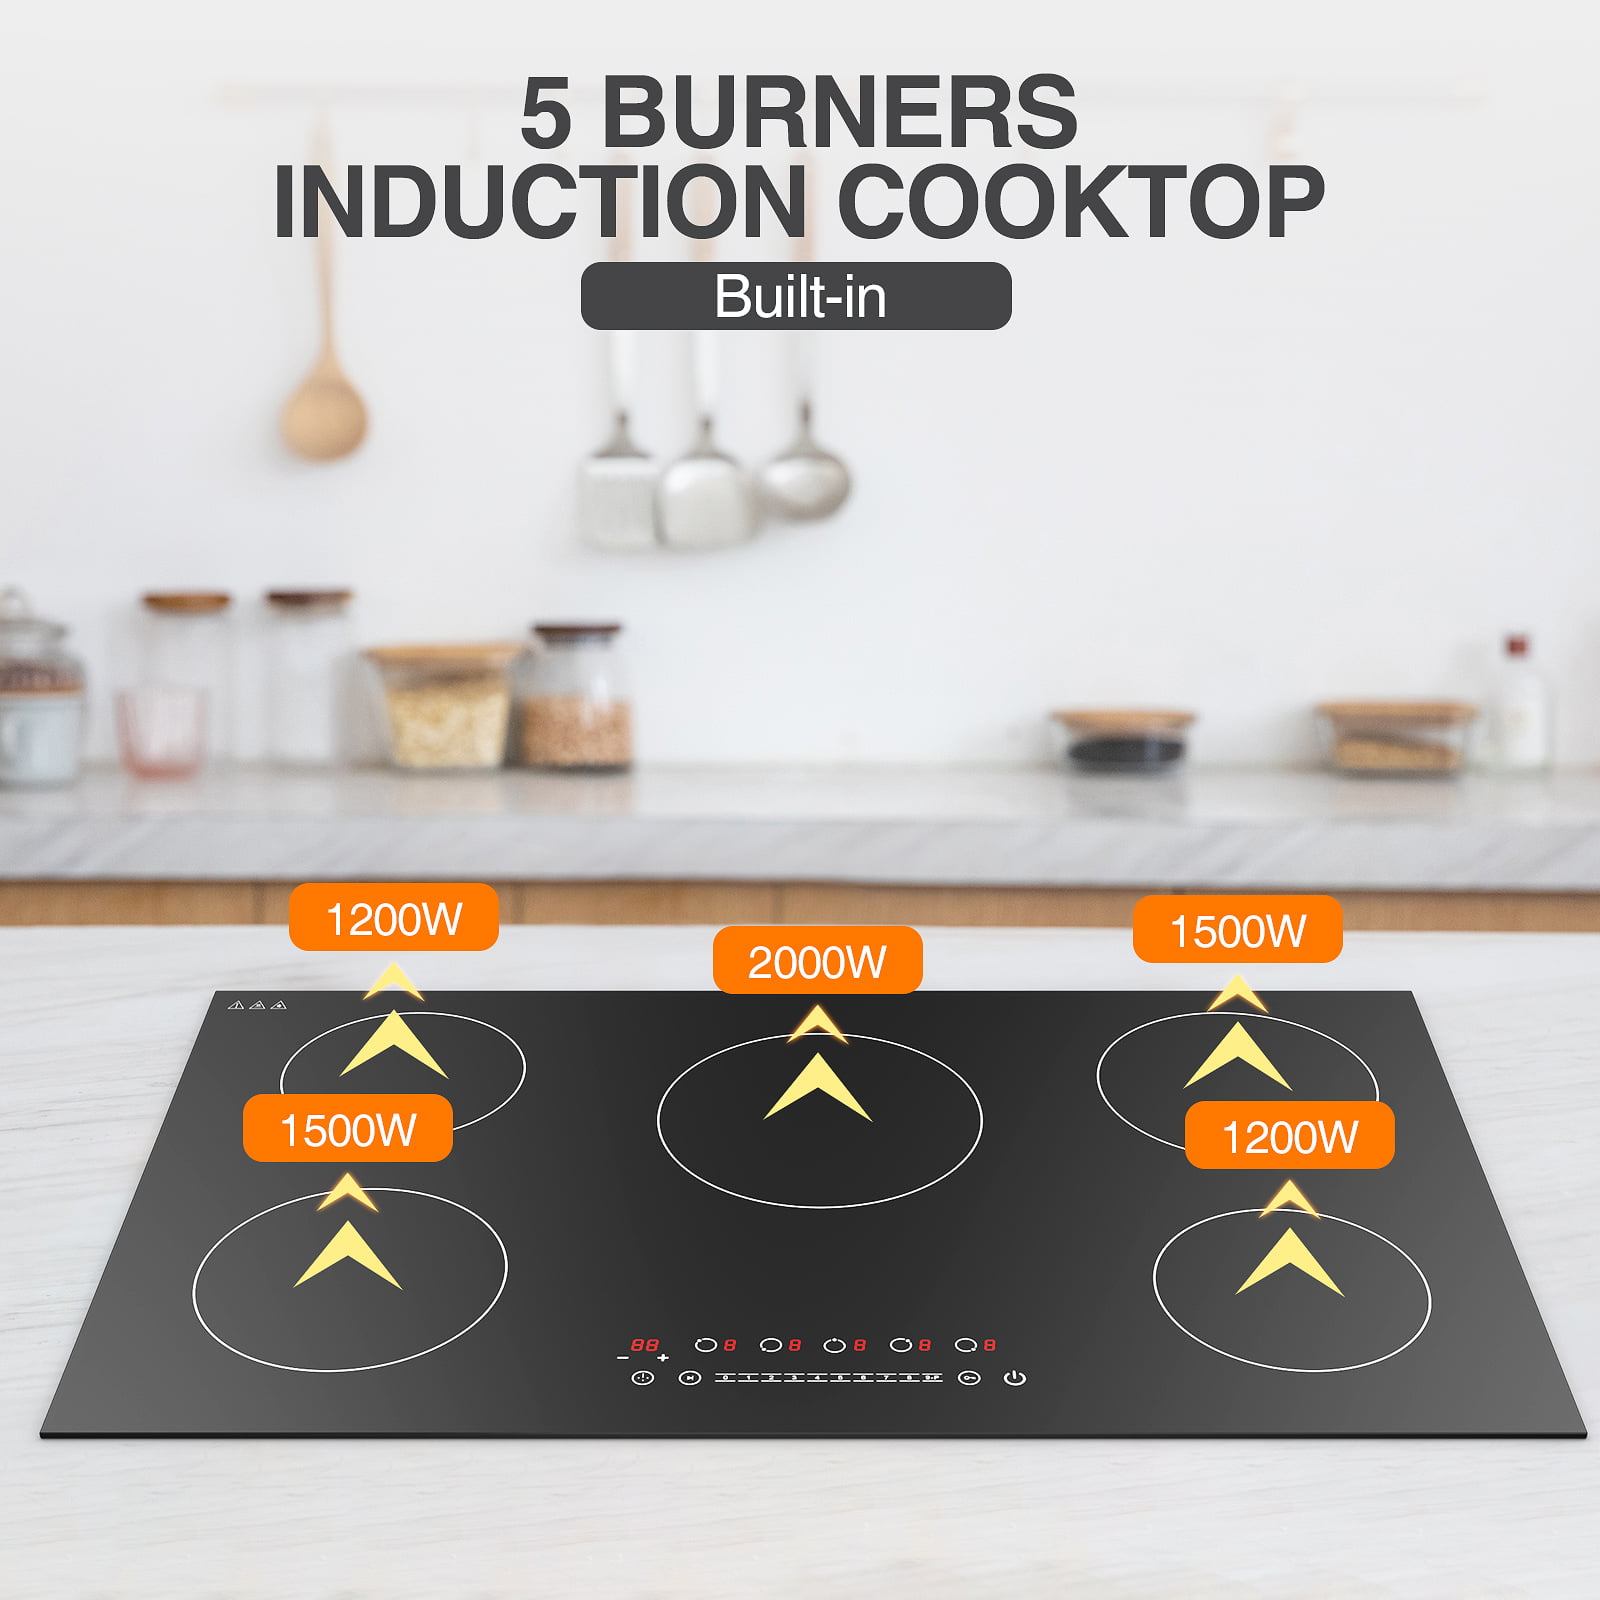 Vbgk Electric Cooktop 36 inch, 240V 8600W 36 inch Induction cooktopBuilt-in and Countertop Electric Stove Top, Knob Control 9 Heating Level Timer 